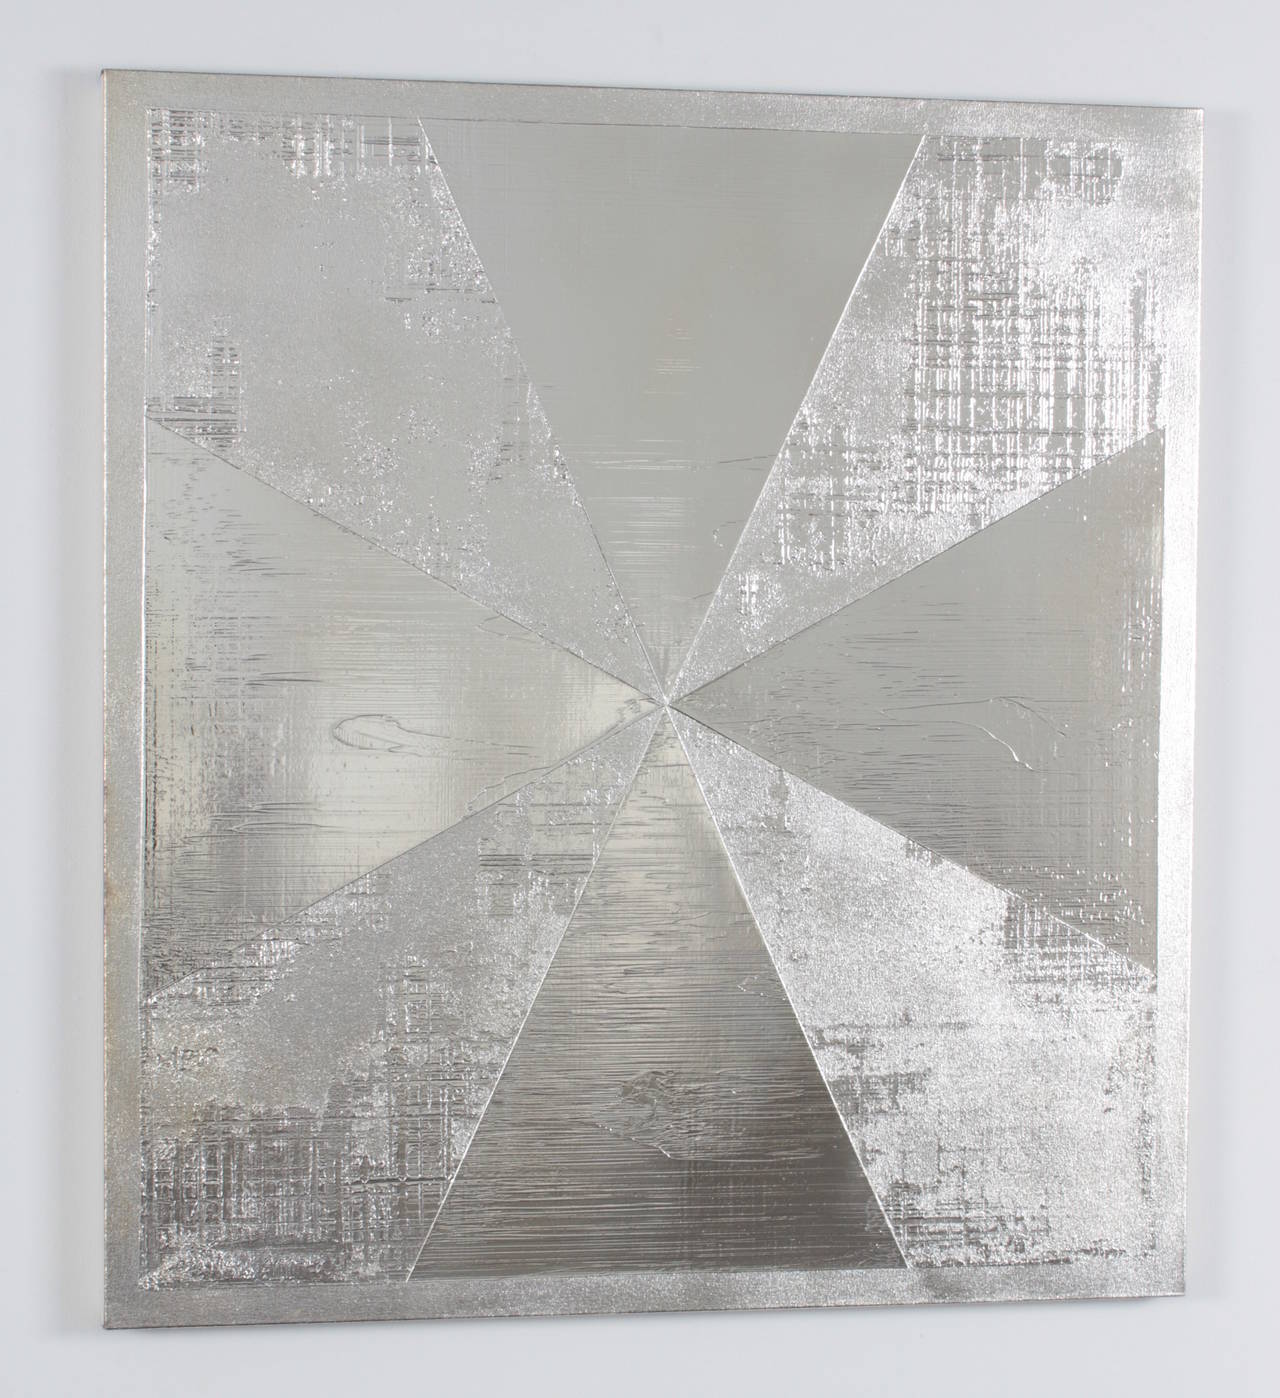 Much like the artists who pioneered the California Light and Space Movement, Gleason is interested in exploring the metaphysical possibilities of art. His silver deposit surfaces act as enigmatic mirrors that are activated by the viewer and the